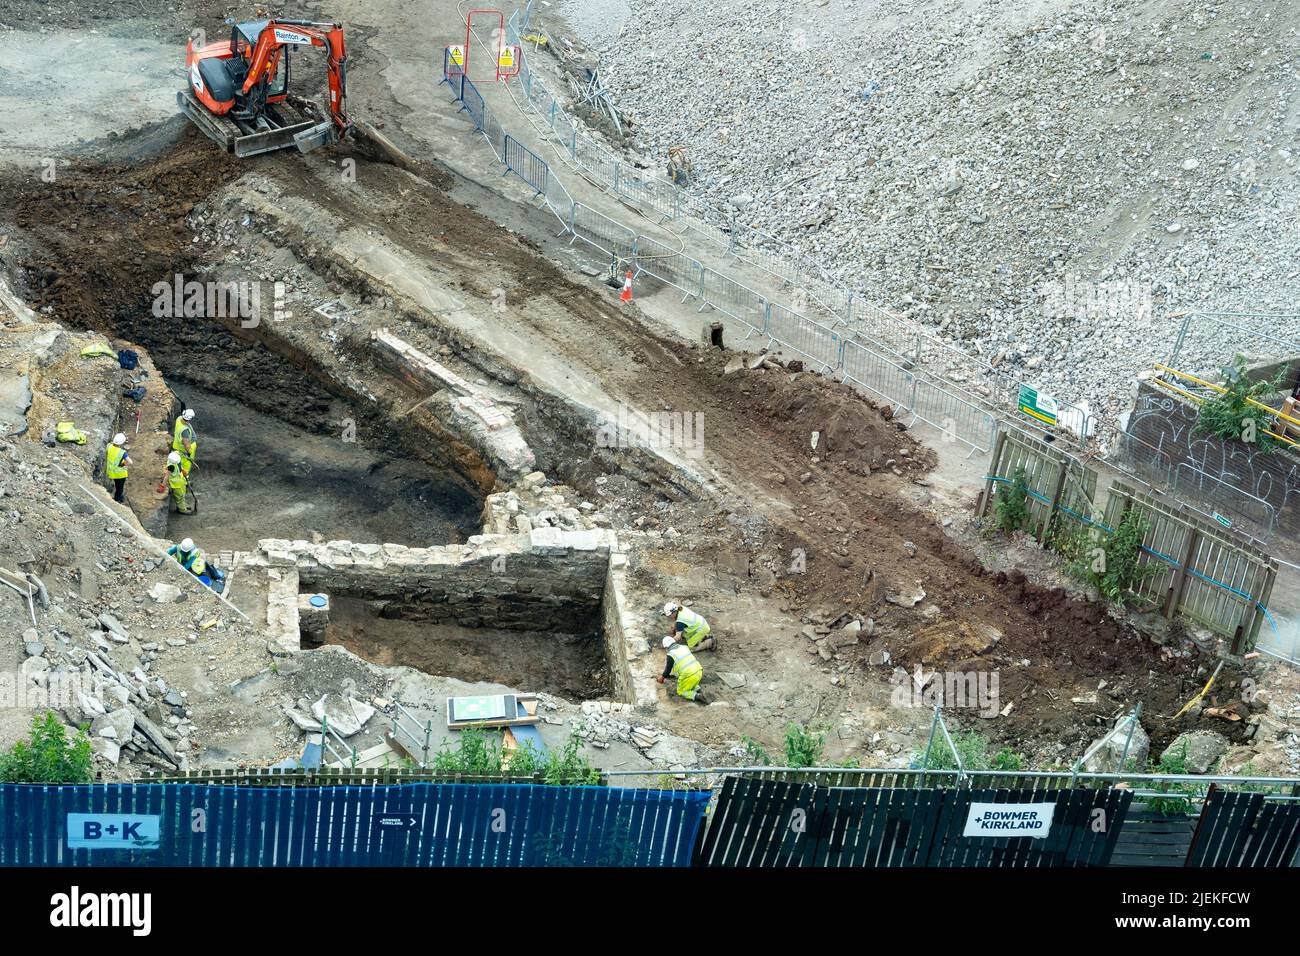 View of archaeologists investigating an excavation site in the city centre of Newcastle upon Tyne, UK, following demolition of buildings. Stock Photo